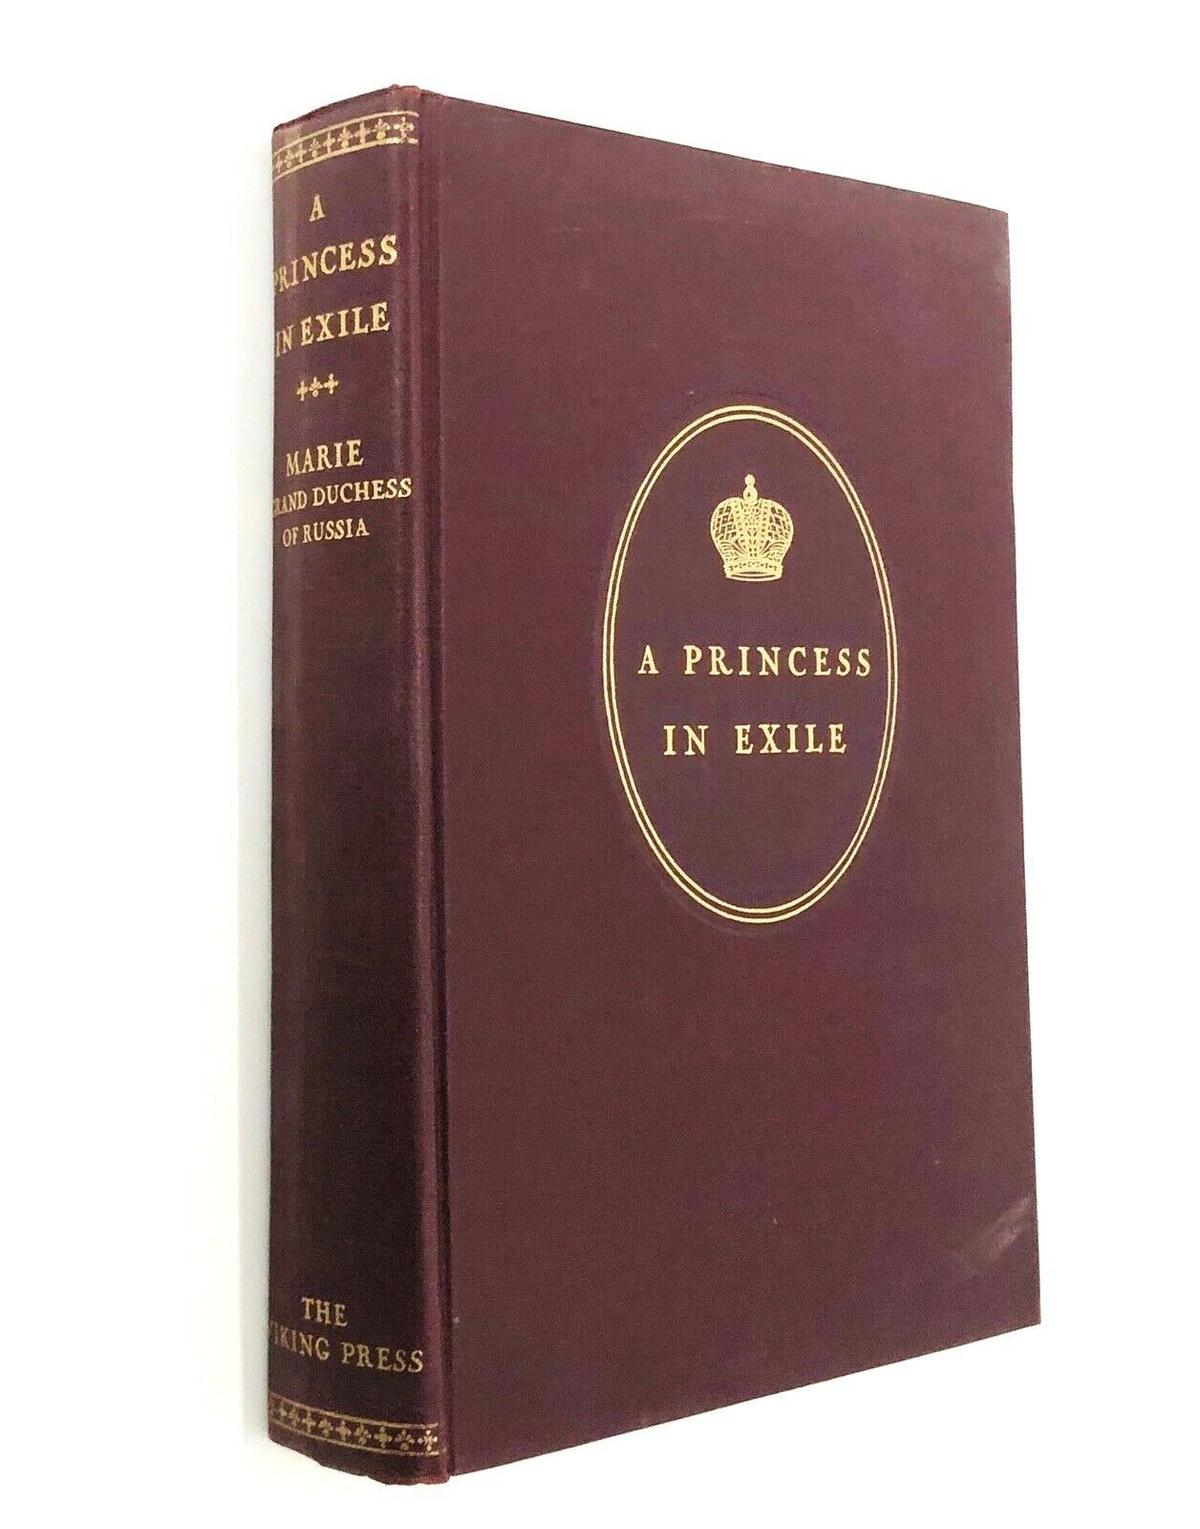 A PRINCESS IN EXILE by Marie, Grand Duchess of Russia (1932)